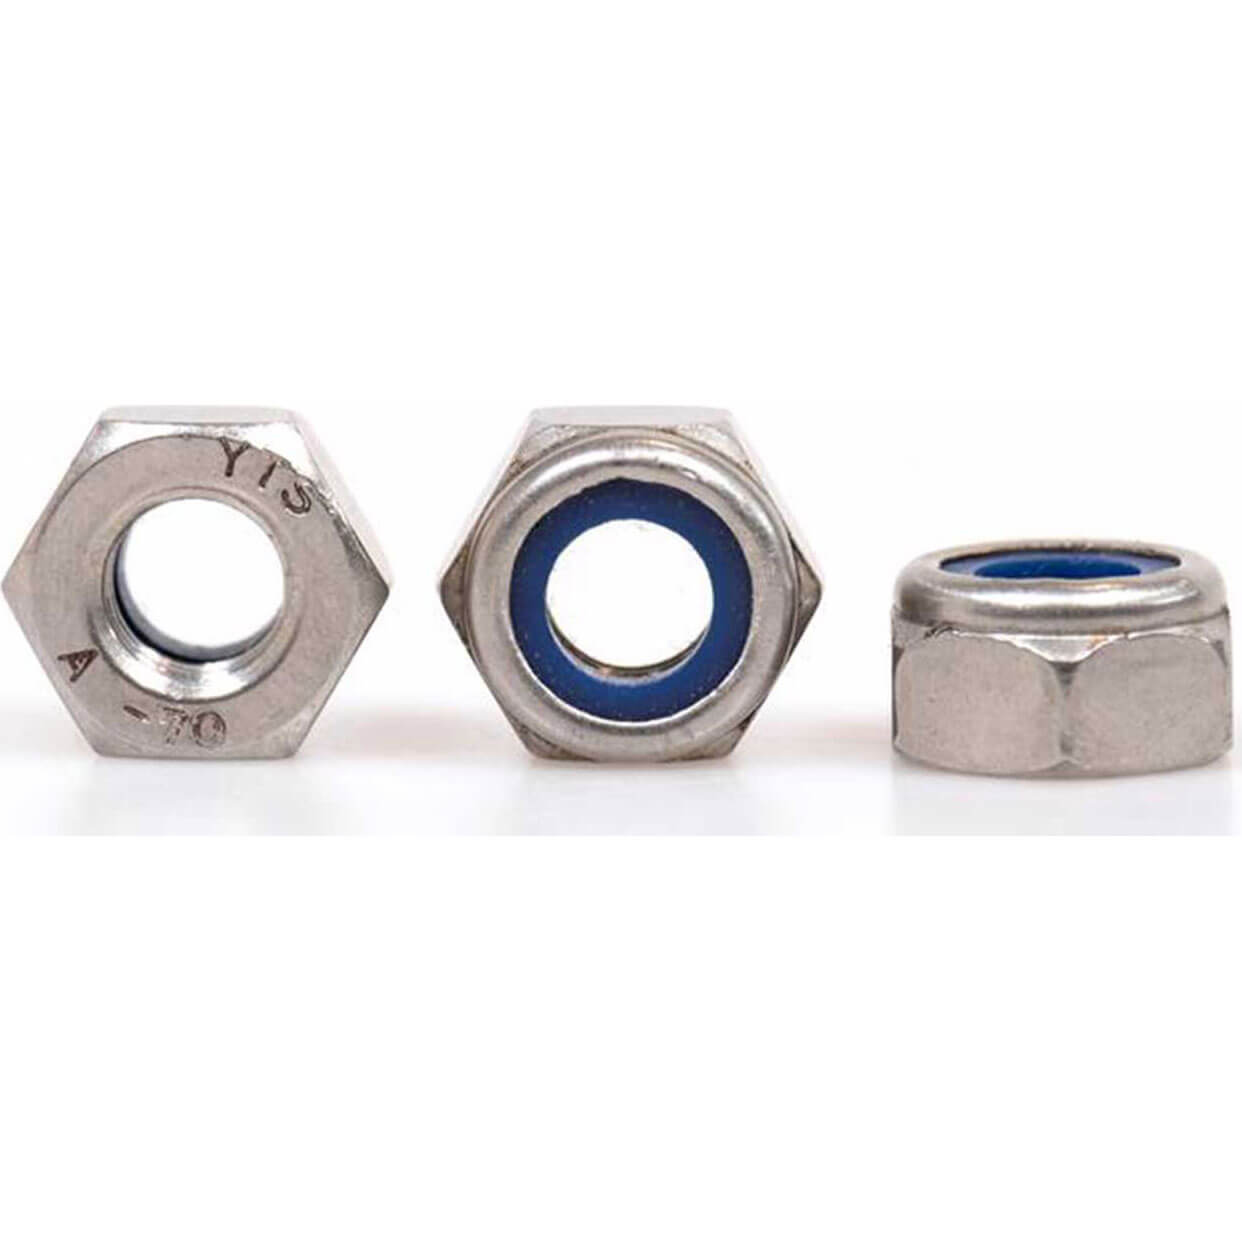 Image of Sirius A4 316 Stainless Steel Nyloc Nuts M20